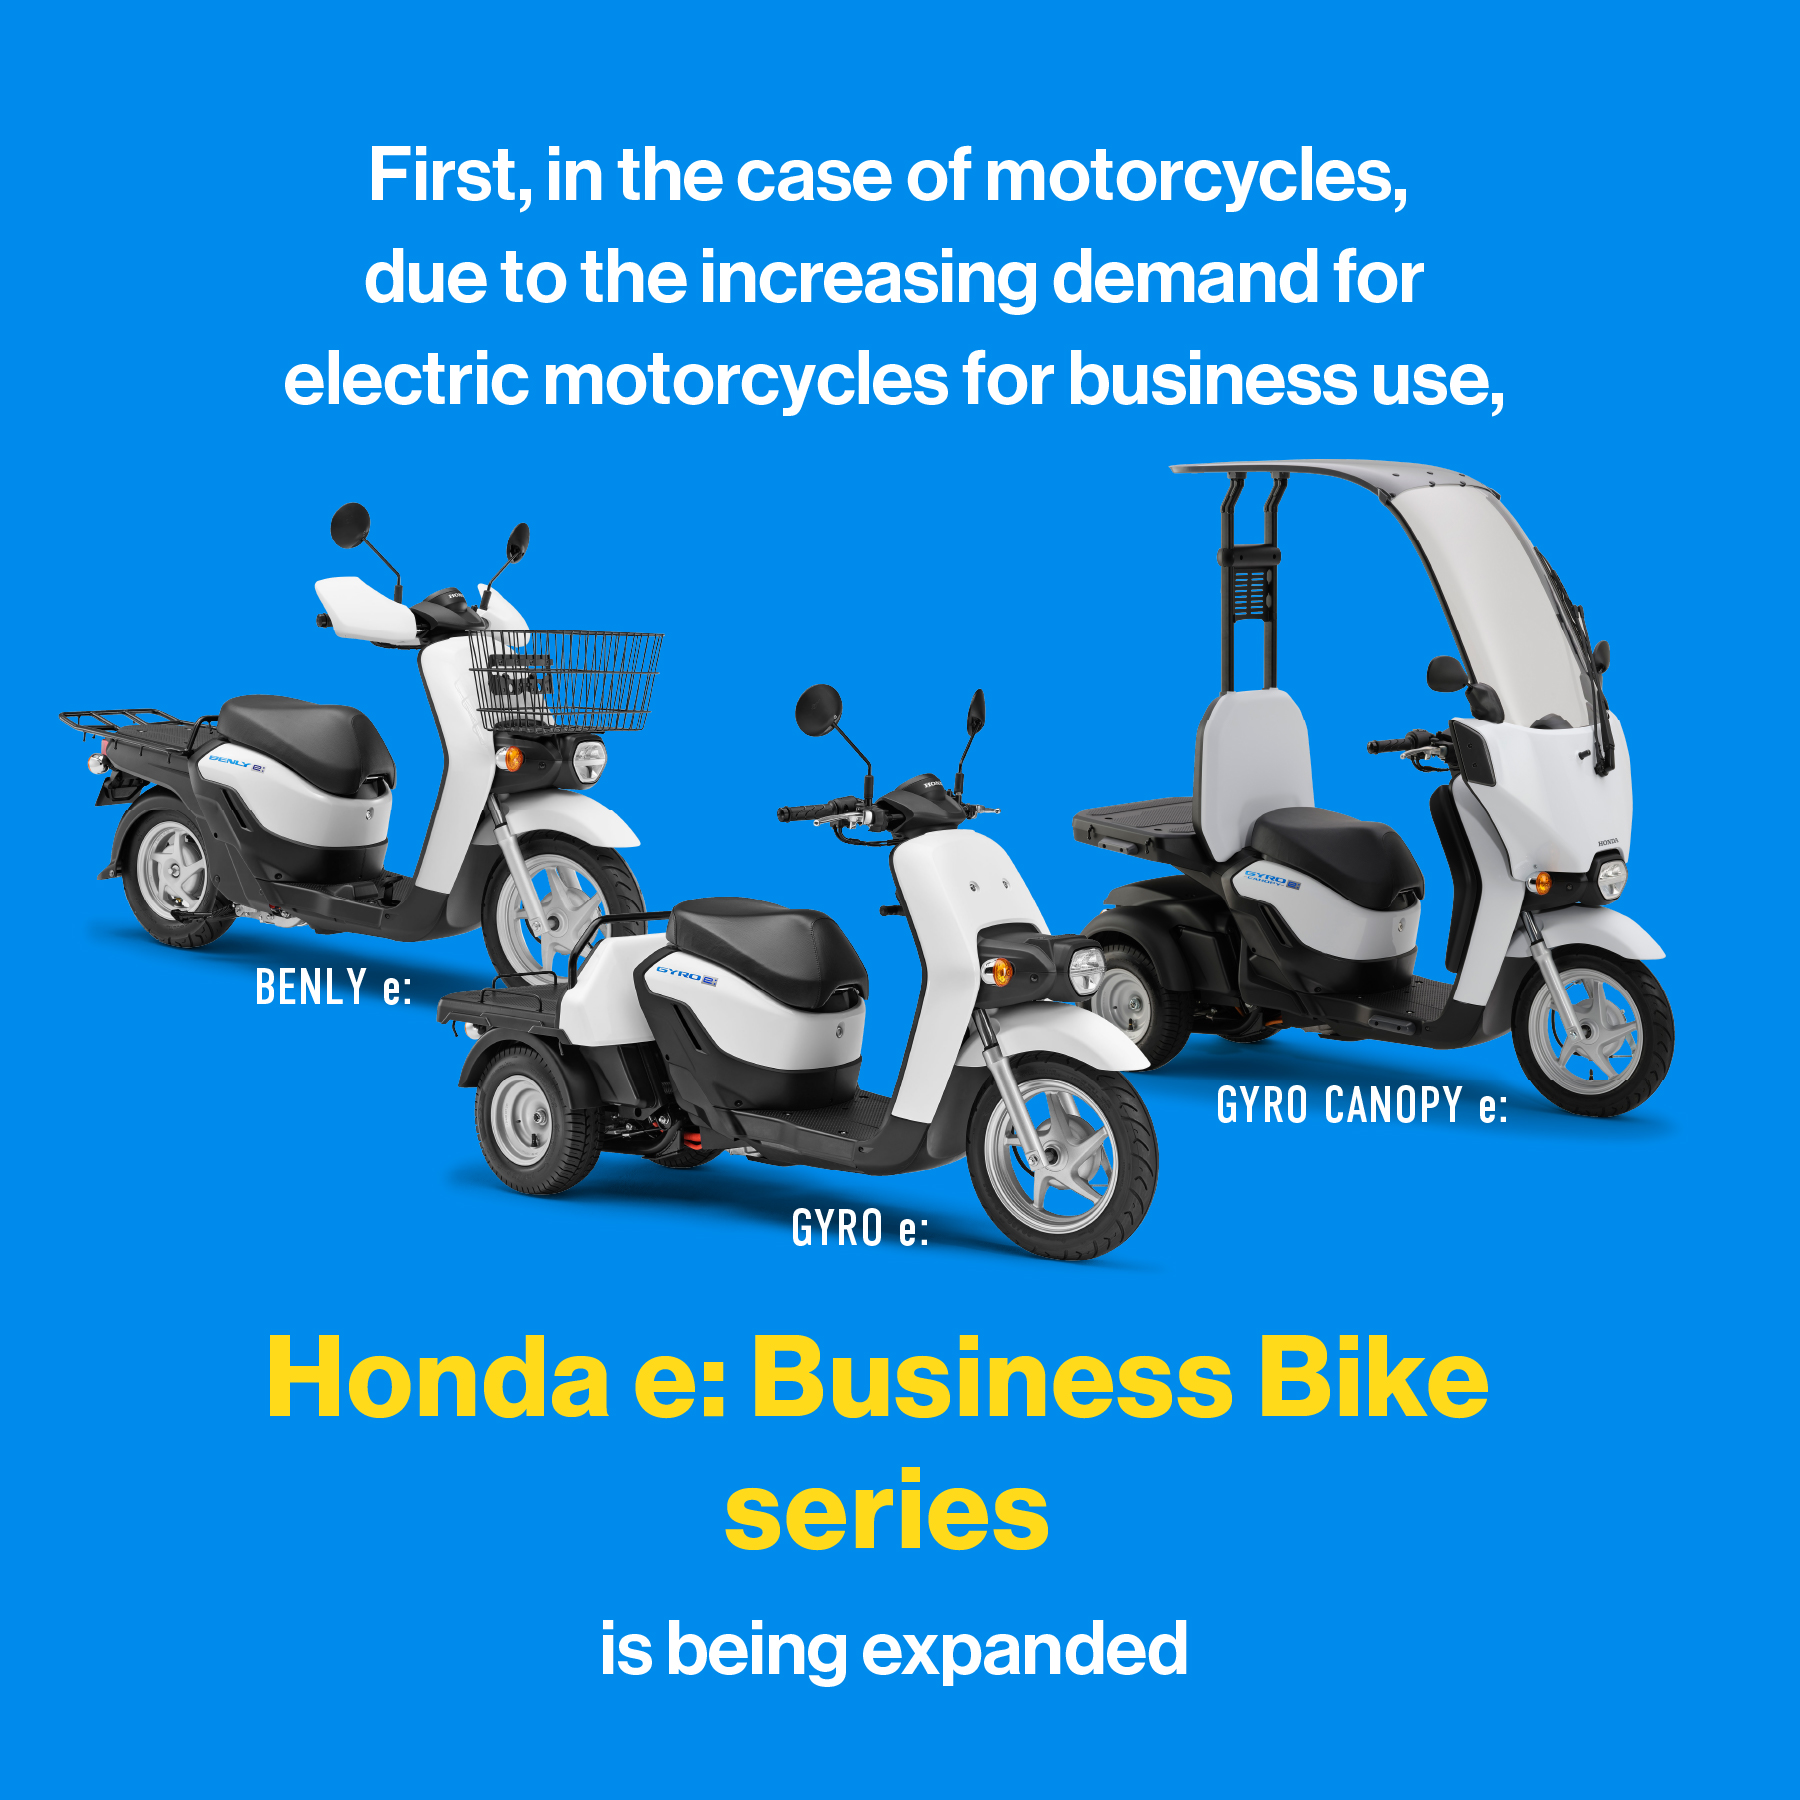 The &quot;Honda e: Business Bike&quot; series equipped with the Mobile Power Pack